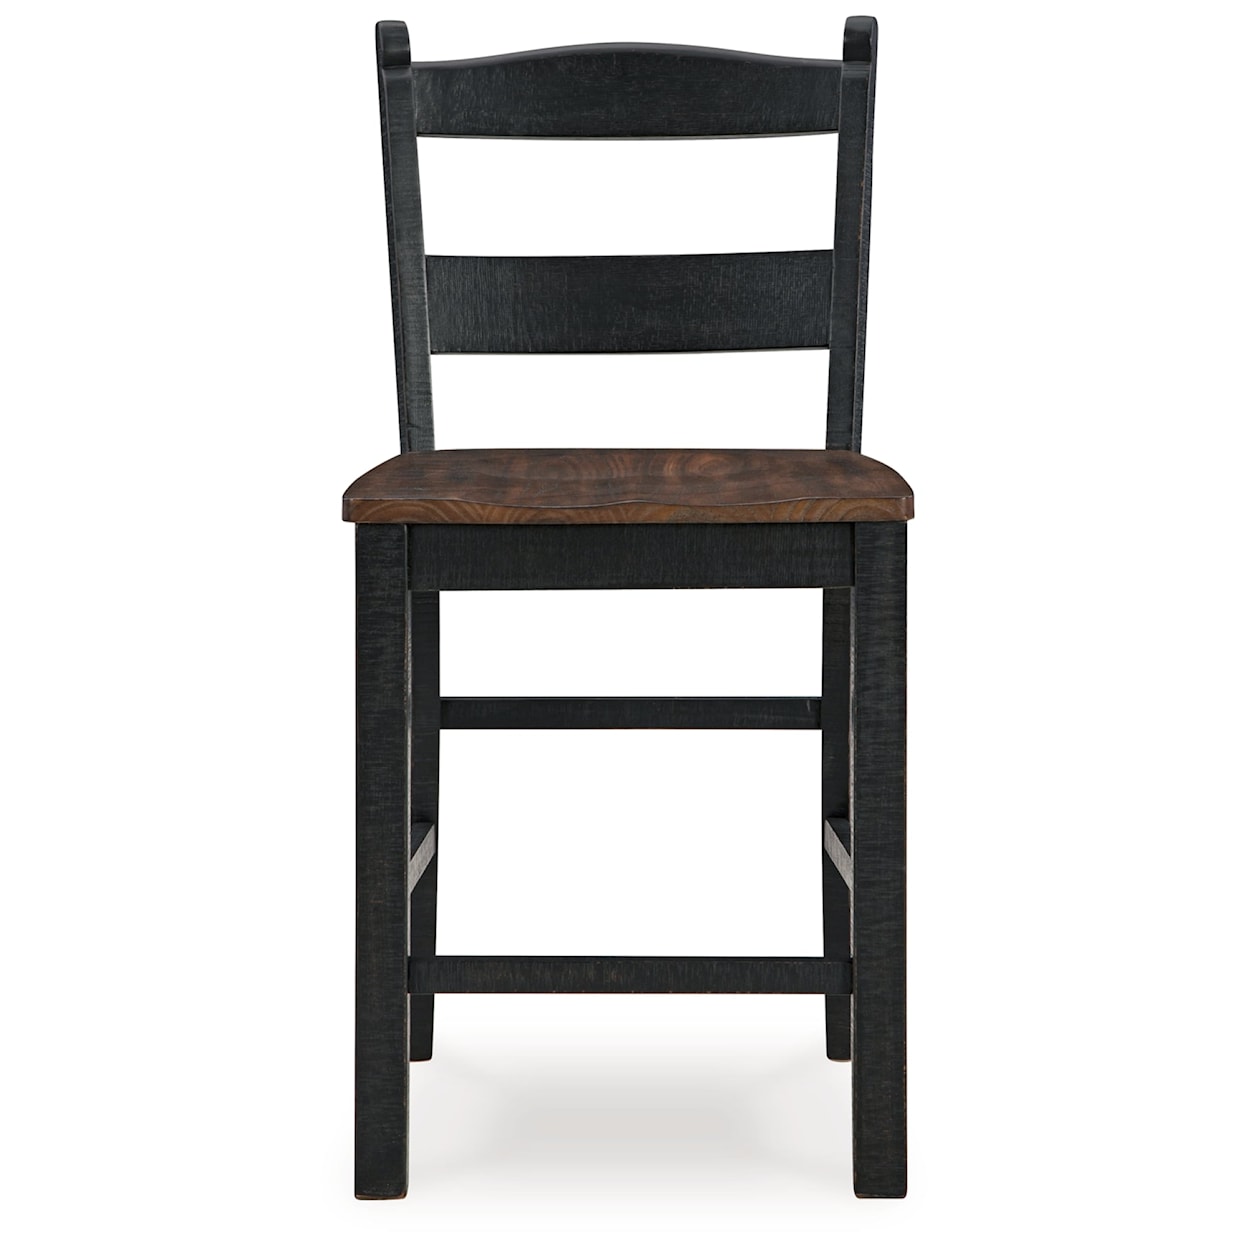 Signature Design by Ashley Valebeck Counter Height Barstool